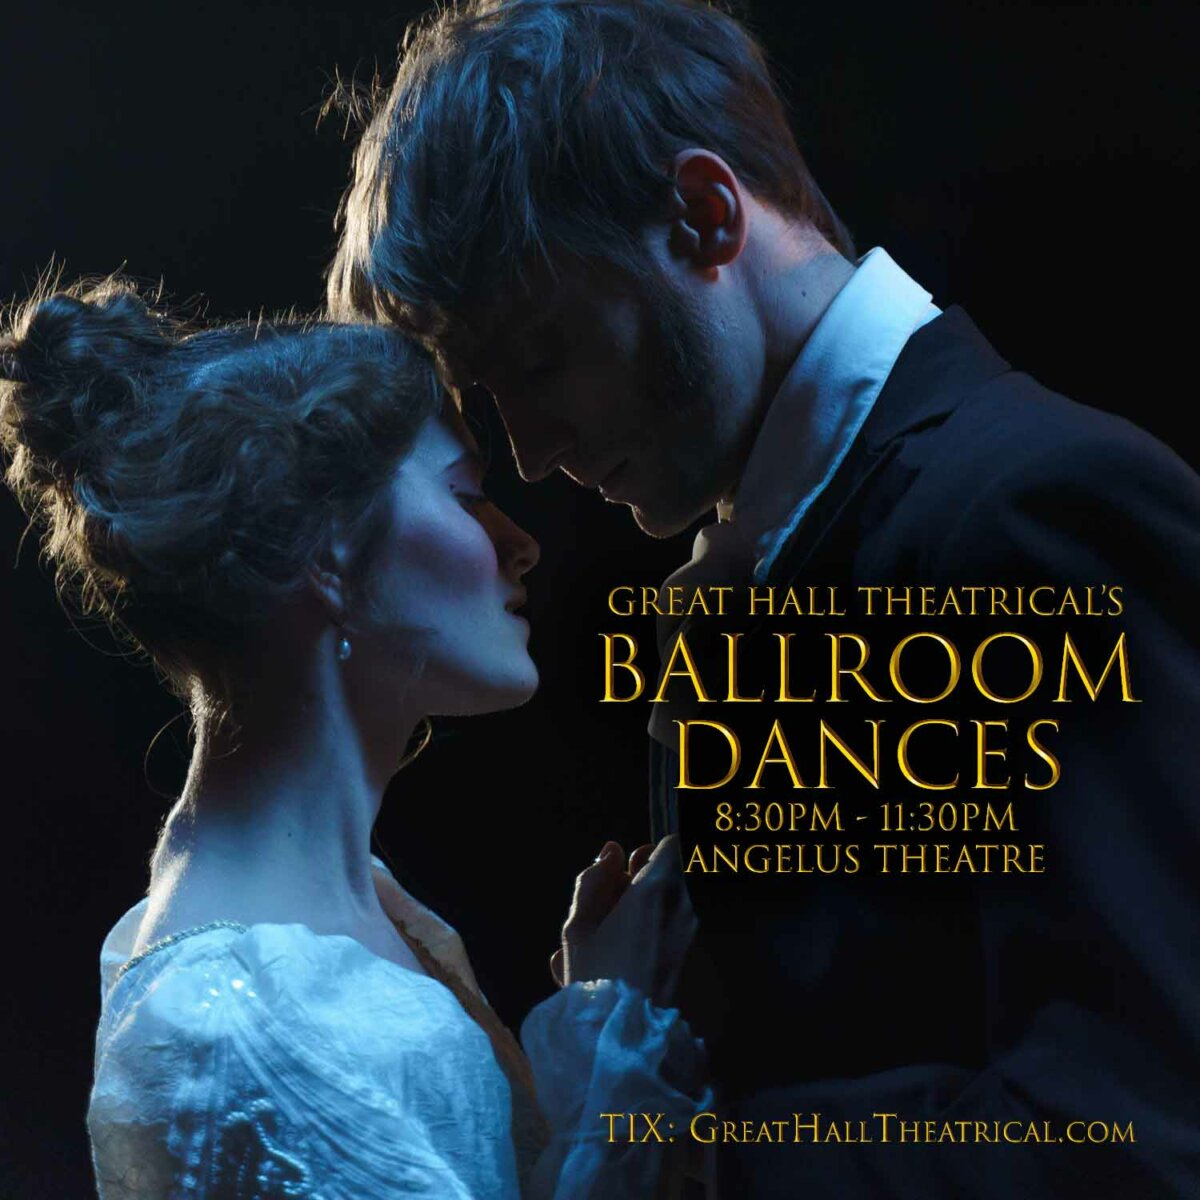 Great Hall Theatrical's Ballroom Dances at the Angelus Theatre